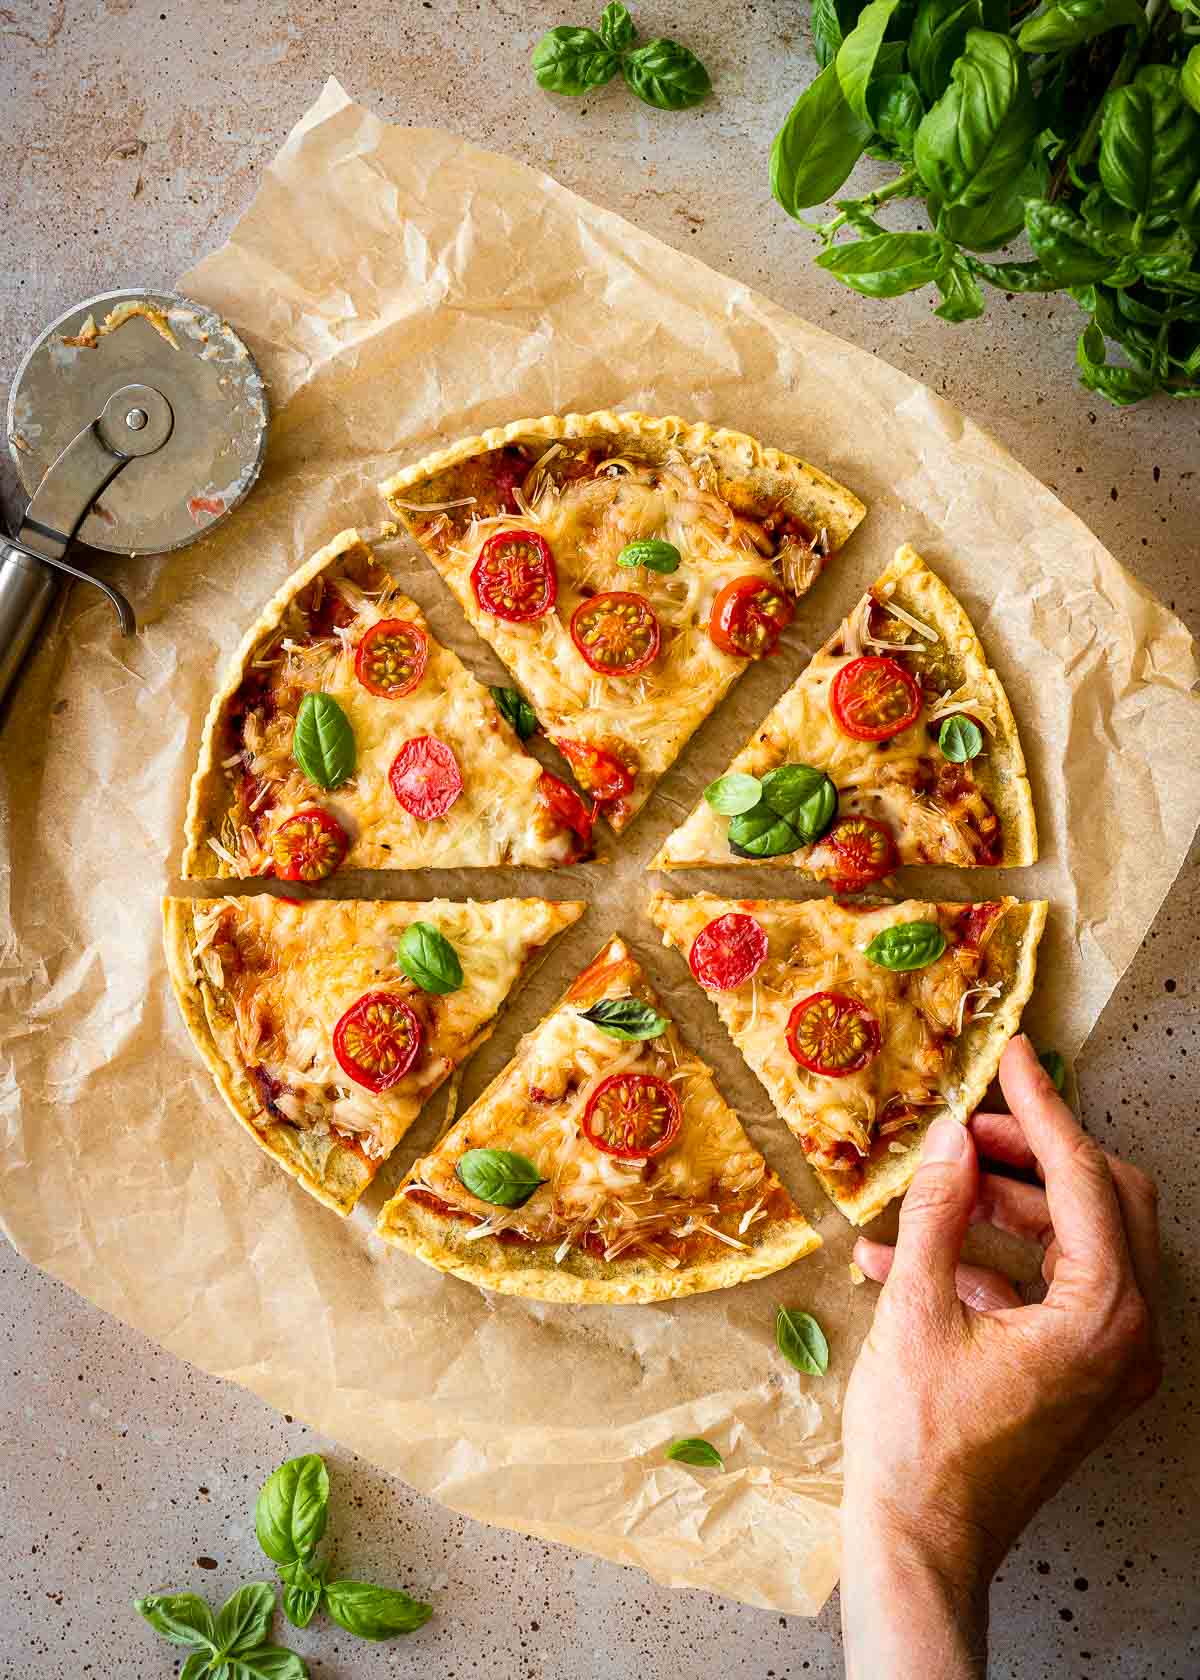 A woman's hand takes a slice of chickpea pizza on parchment paper. Basil leaves and a pizza wheel sit nearby.